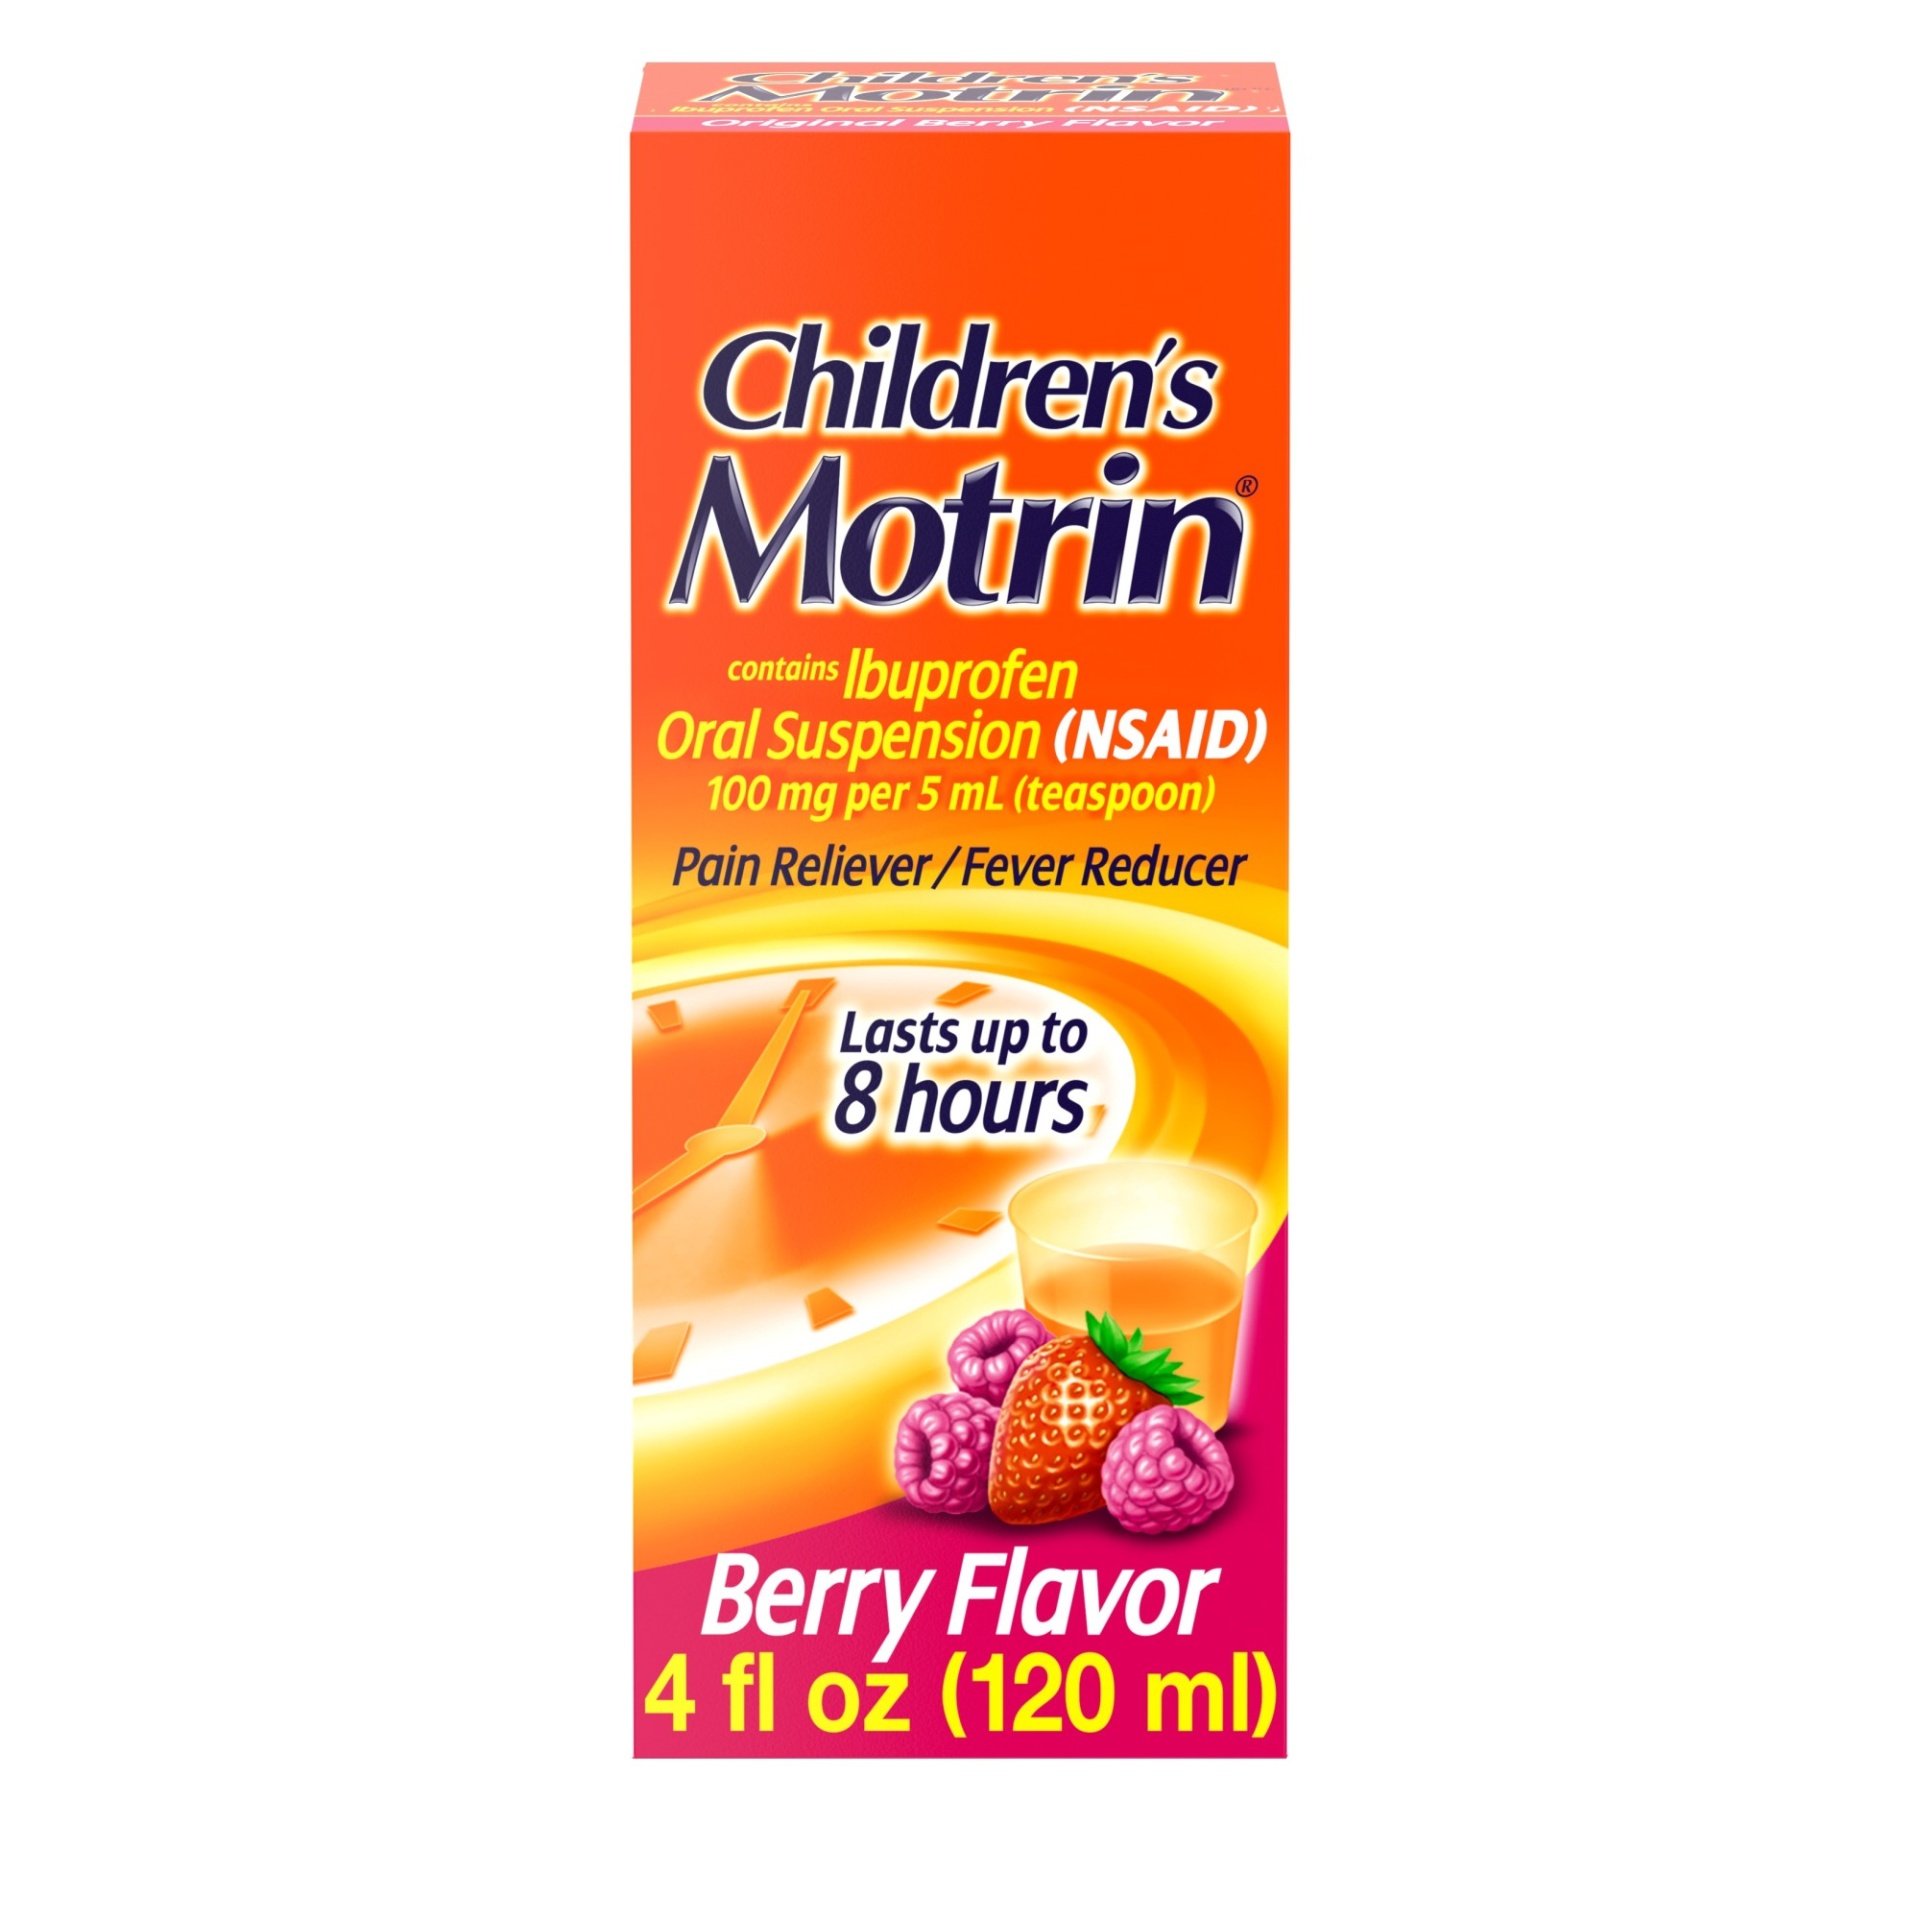 slide 1 of 6, Children's Motrin Oral Suspension Medicine Ibuprofen, Kids Fever Reducer & Pain Reliever for Minor Aches & Pains Due to Cold & Flu, Alcohol-Free, Berry Flavored, 4 oz